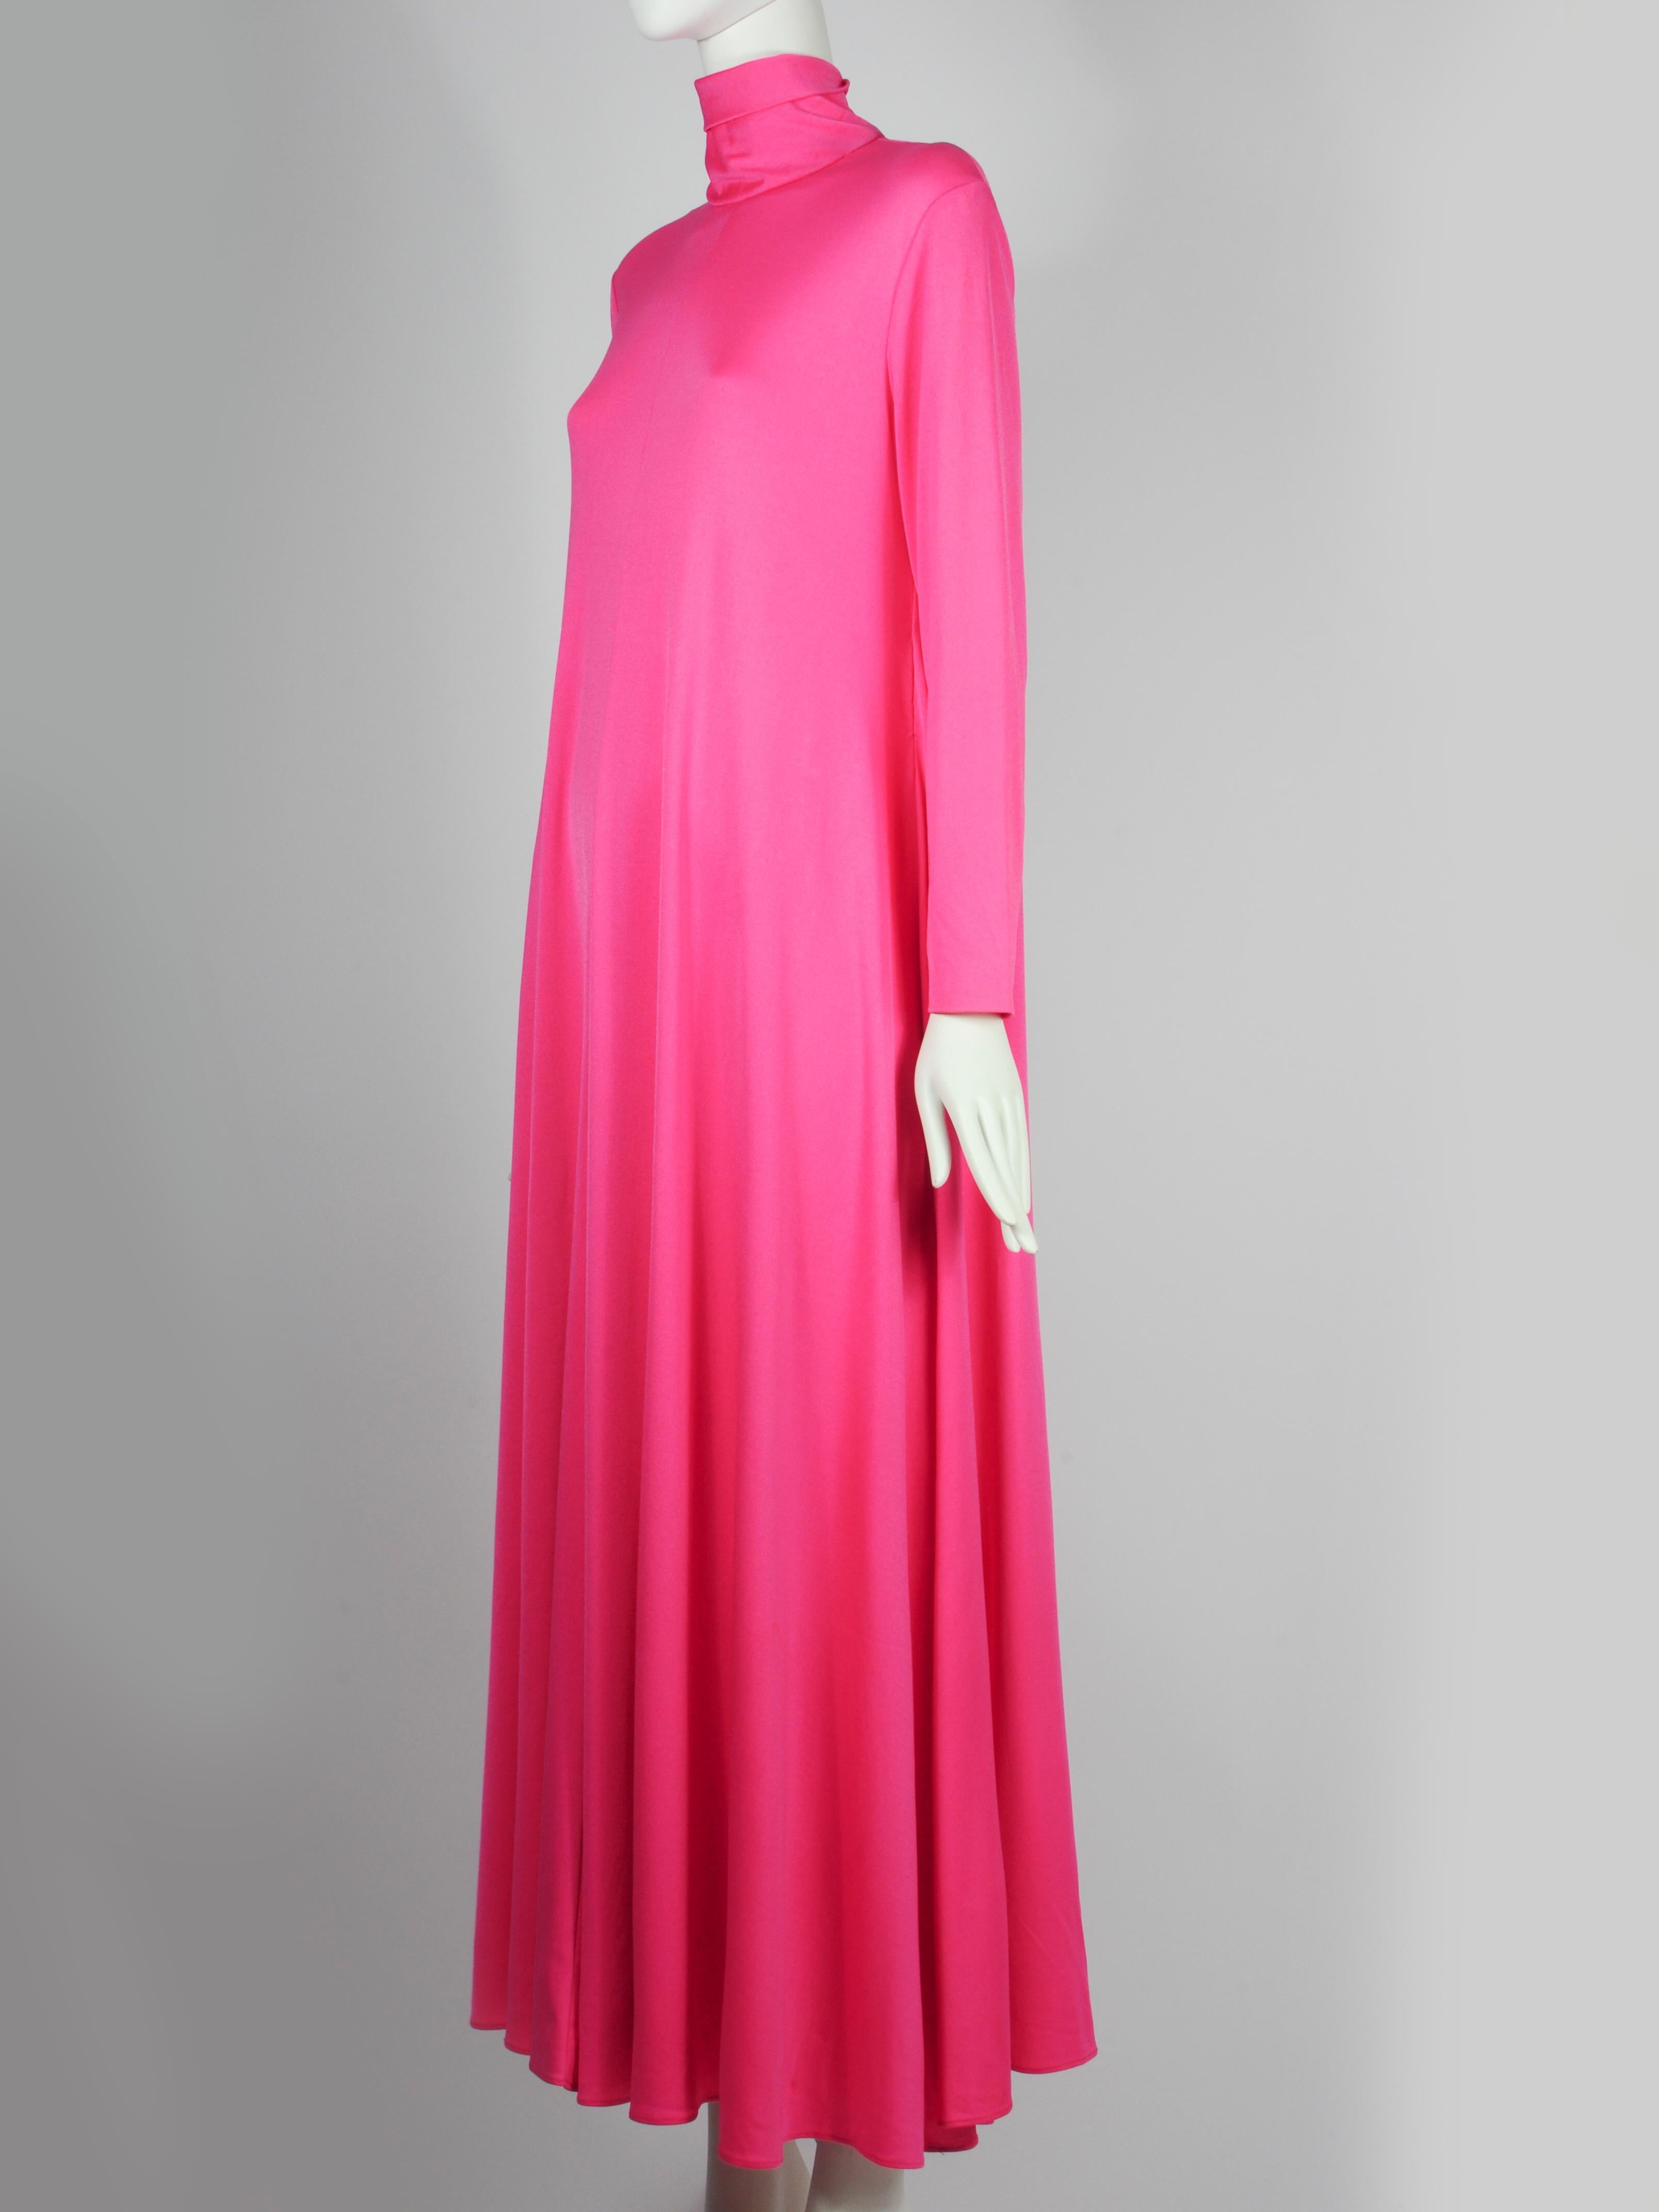 Fuchsia pink spandex maxi dress by The Gilberts for Tally New York. It is both minimalist as maximalist at the same time. There is a lot of the spandex fabric that will beautifully flow when you walk. A very modern 1970s design.

BRAND